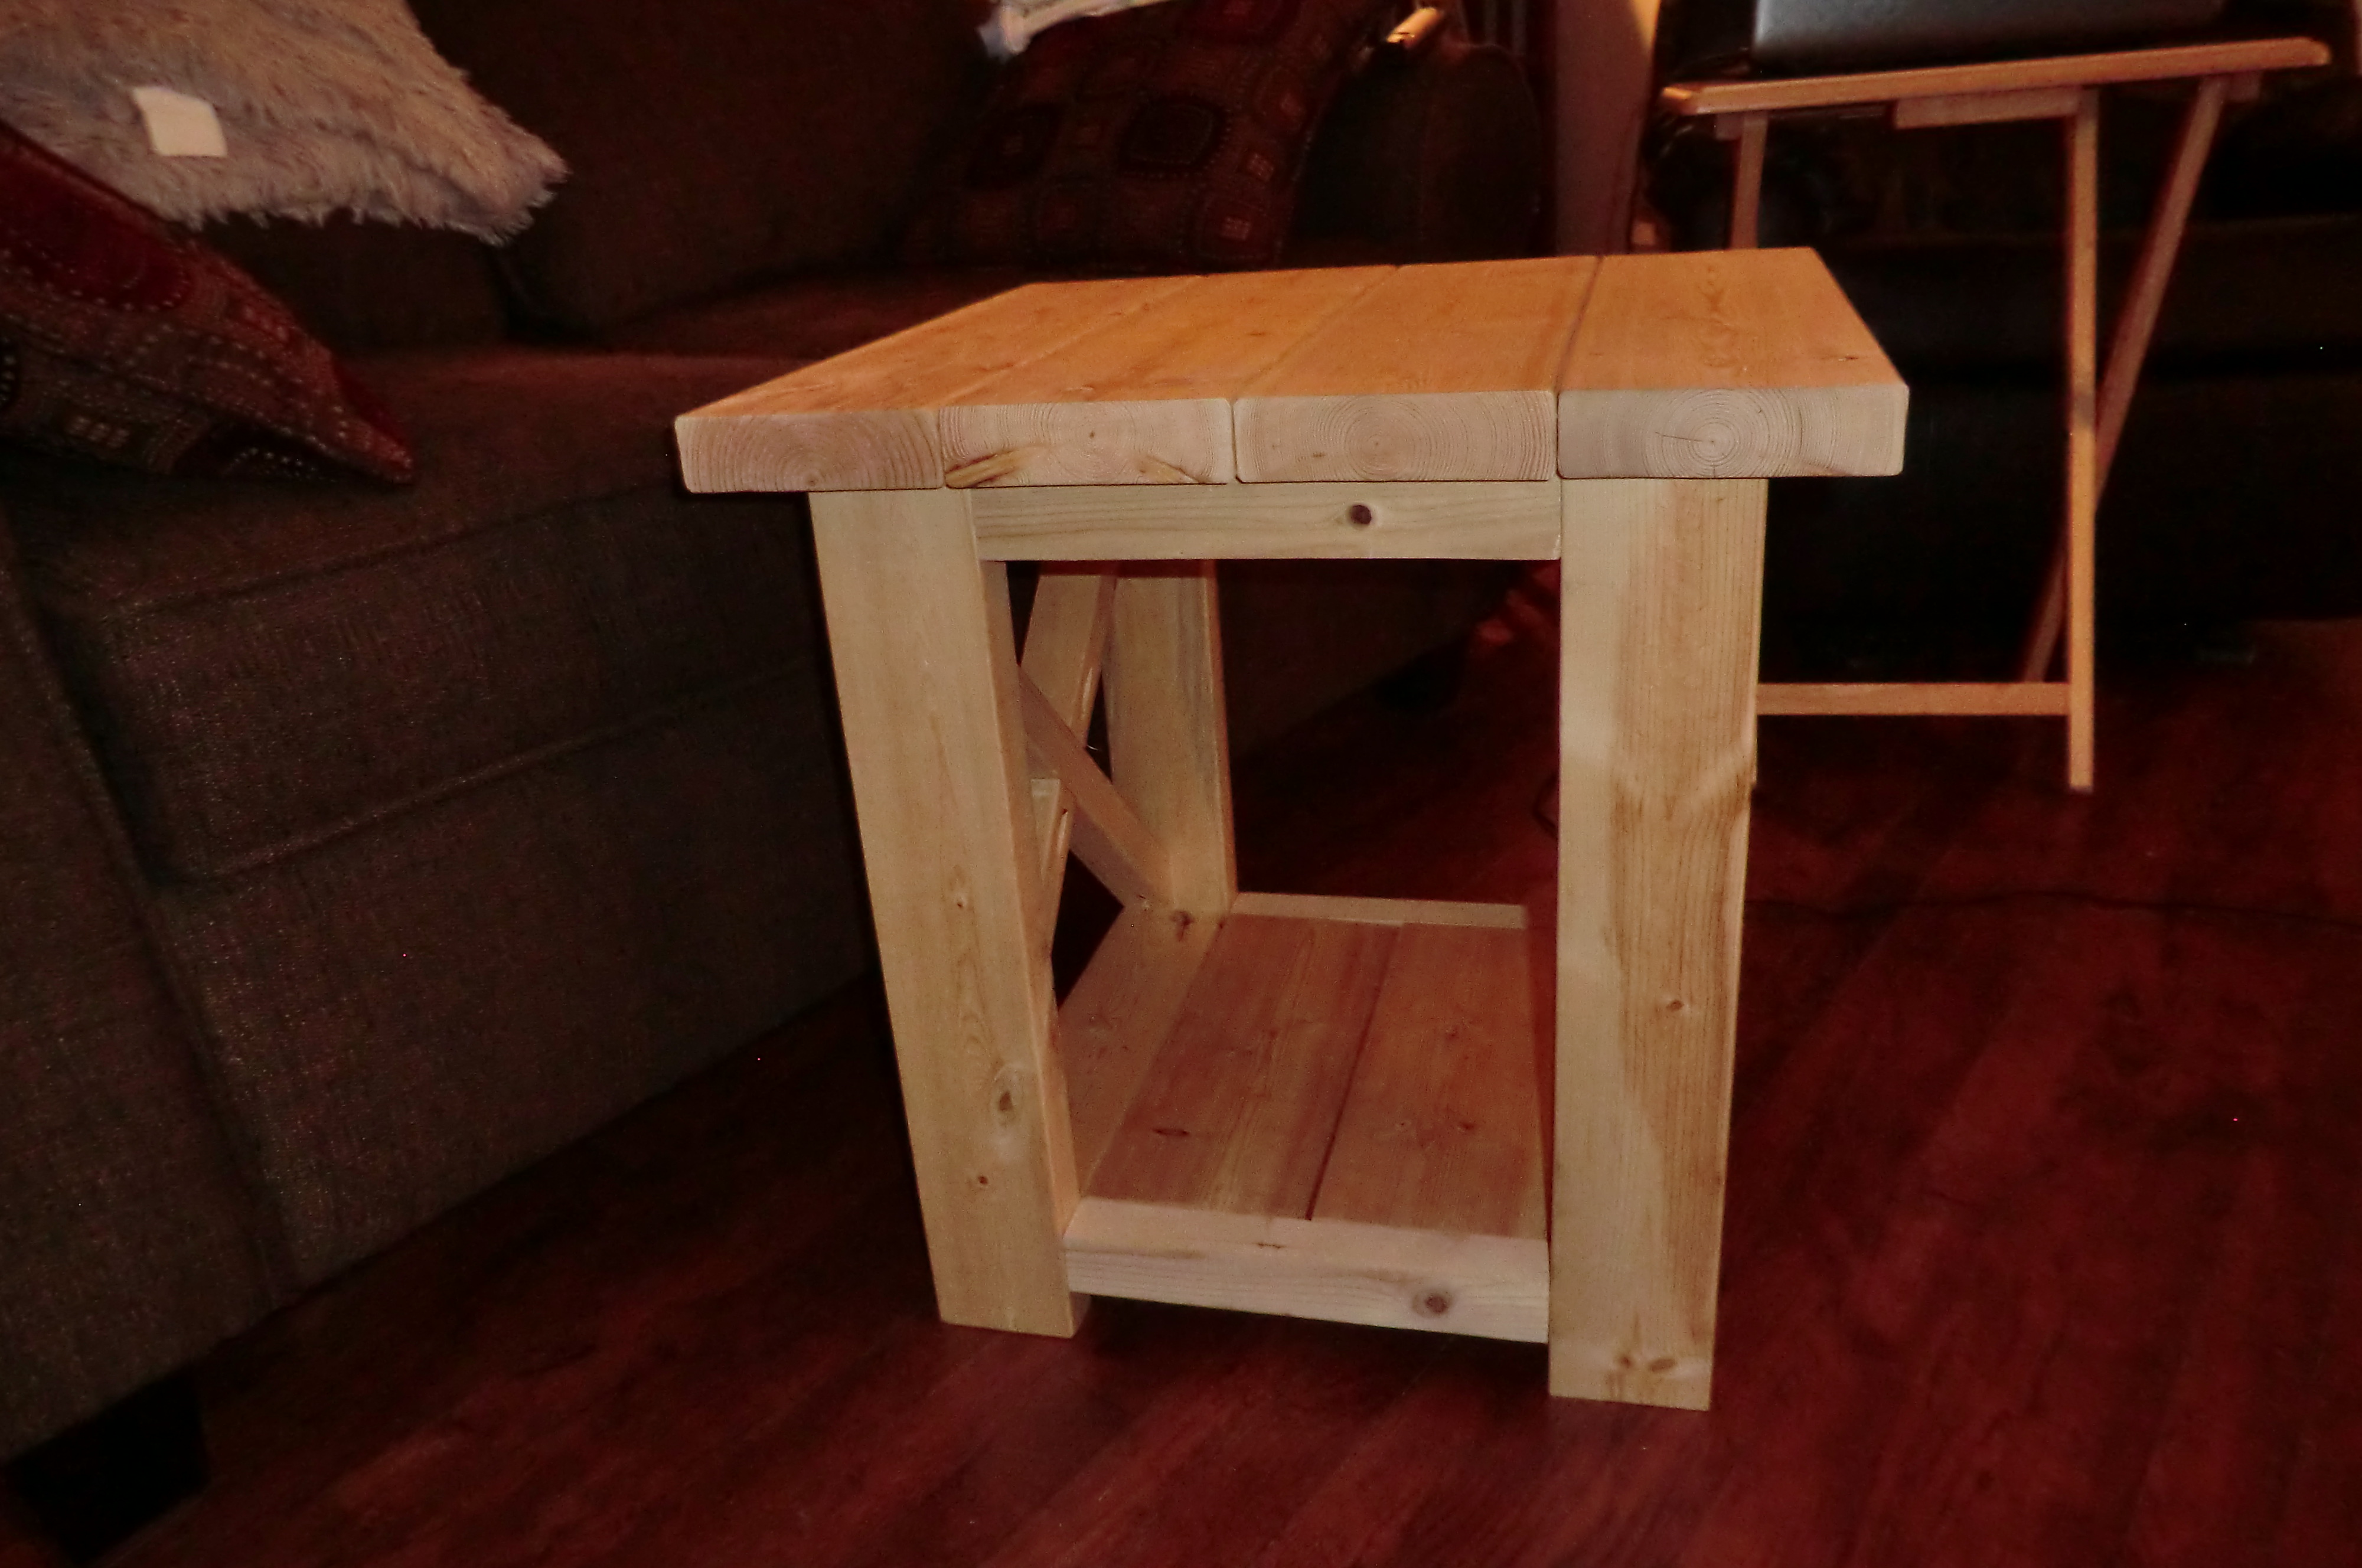 laptop holder probably super real rustic wood end tables idea ana white smaller table diy projects paint for furniture without sanding havertys coffee with wheels ikea comfortable